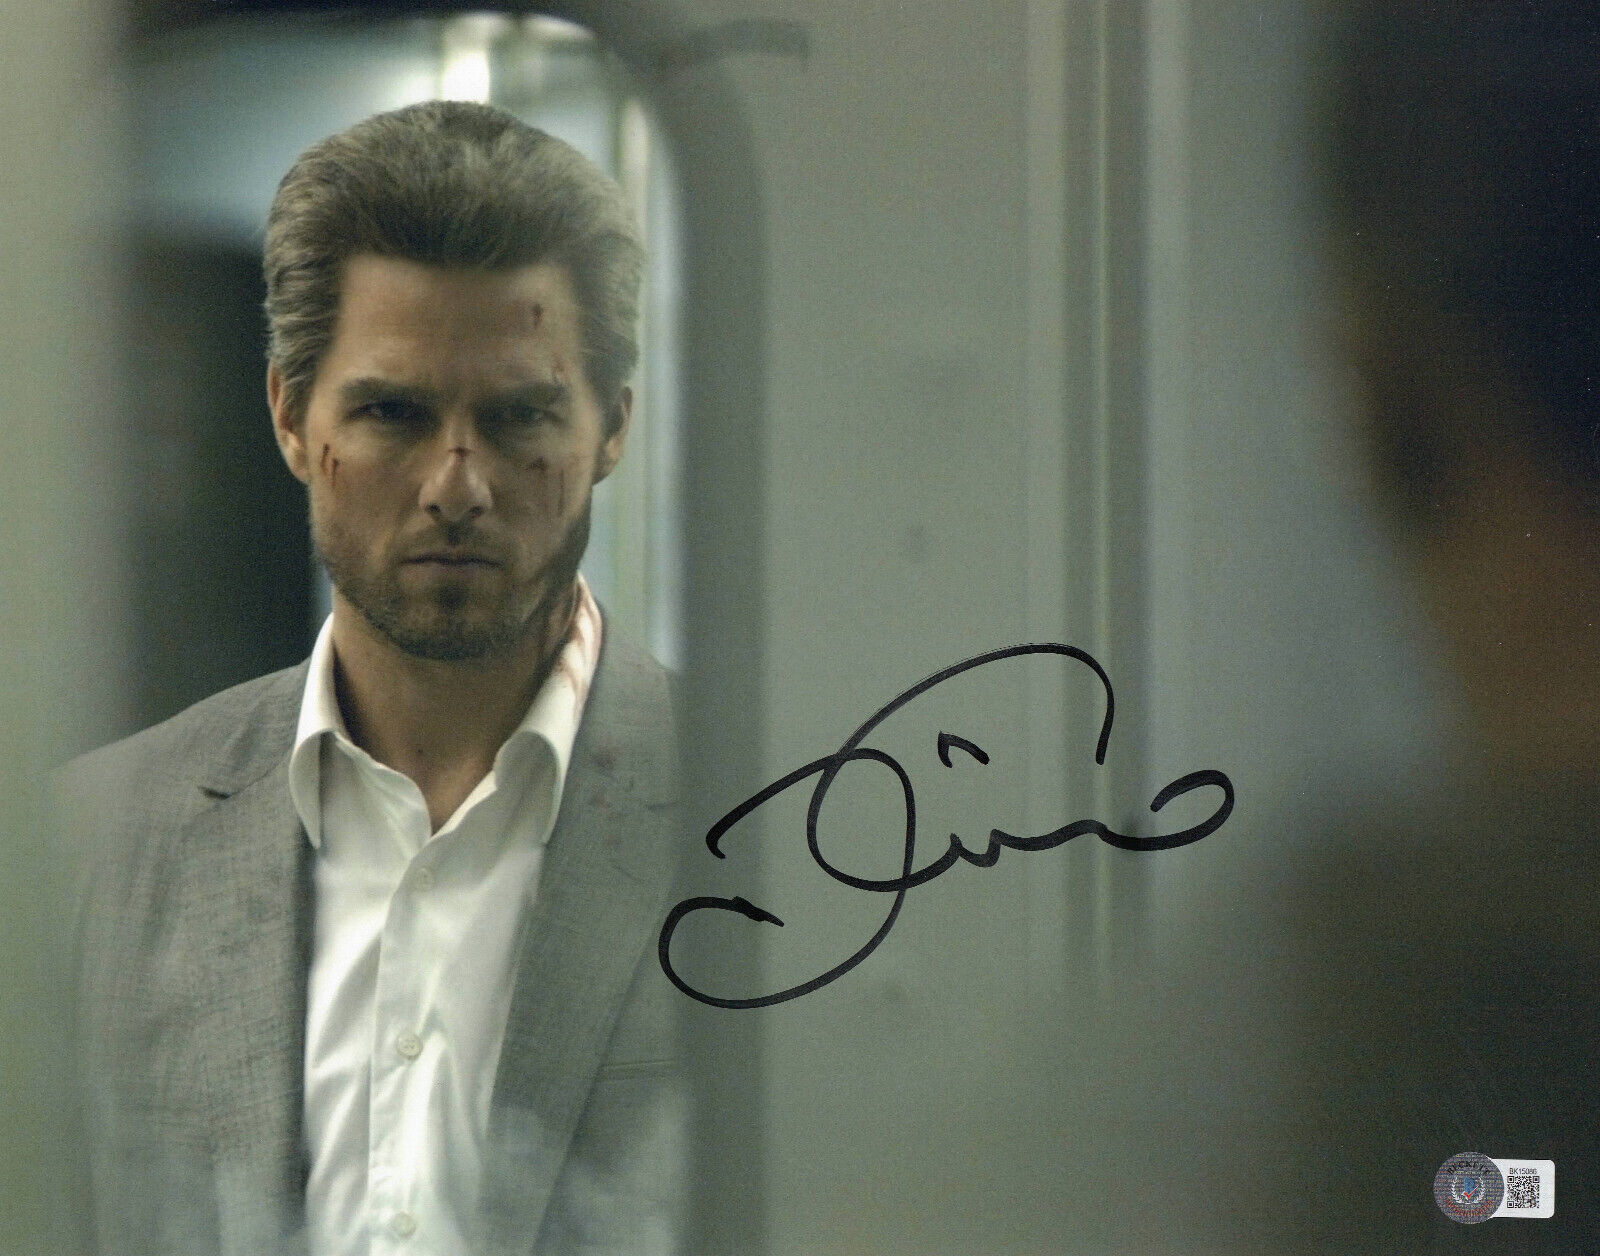 TOM CRUISE SIGNED AUTOGRAPH COLLATERAL 11X14 PHOTO BECKETT BAS